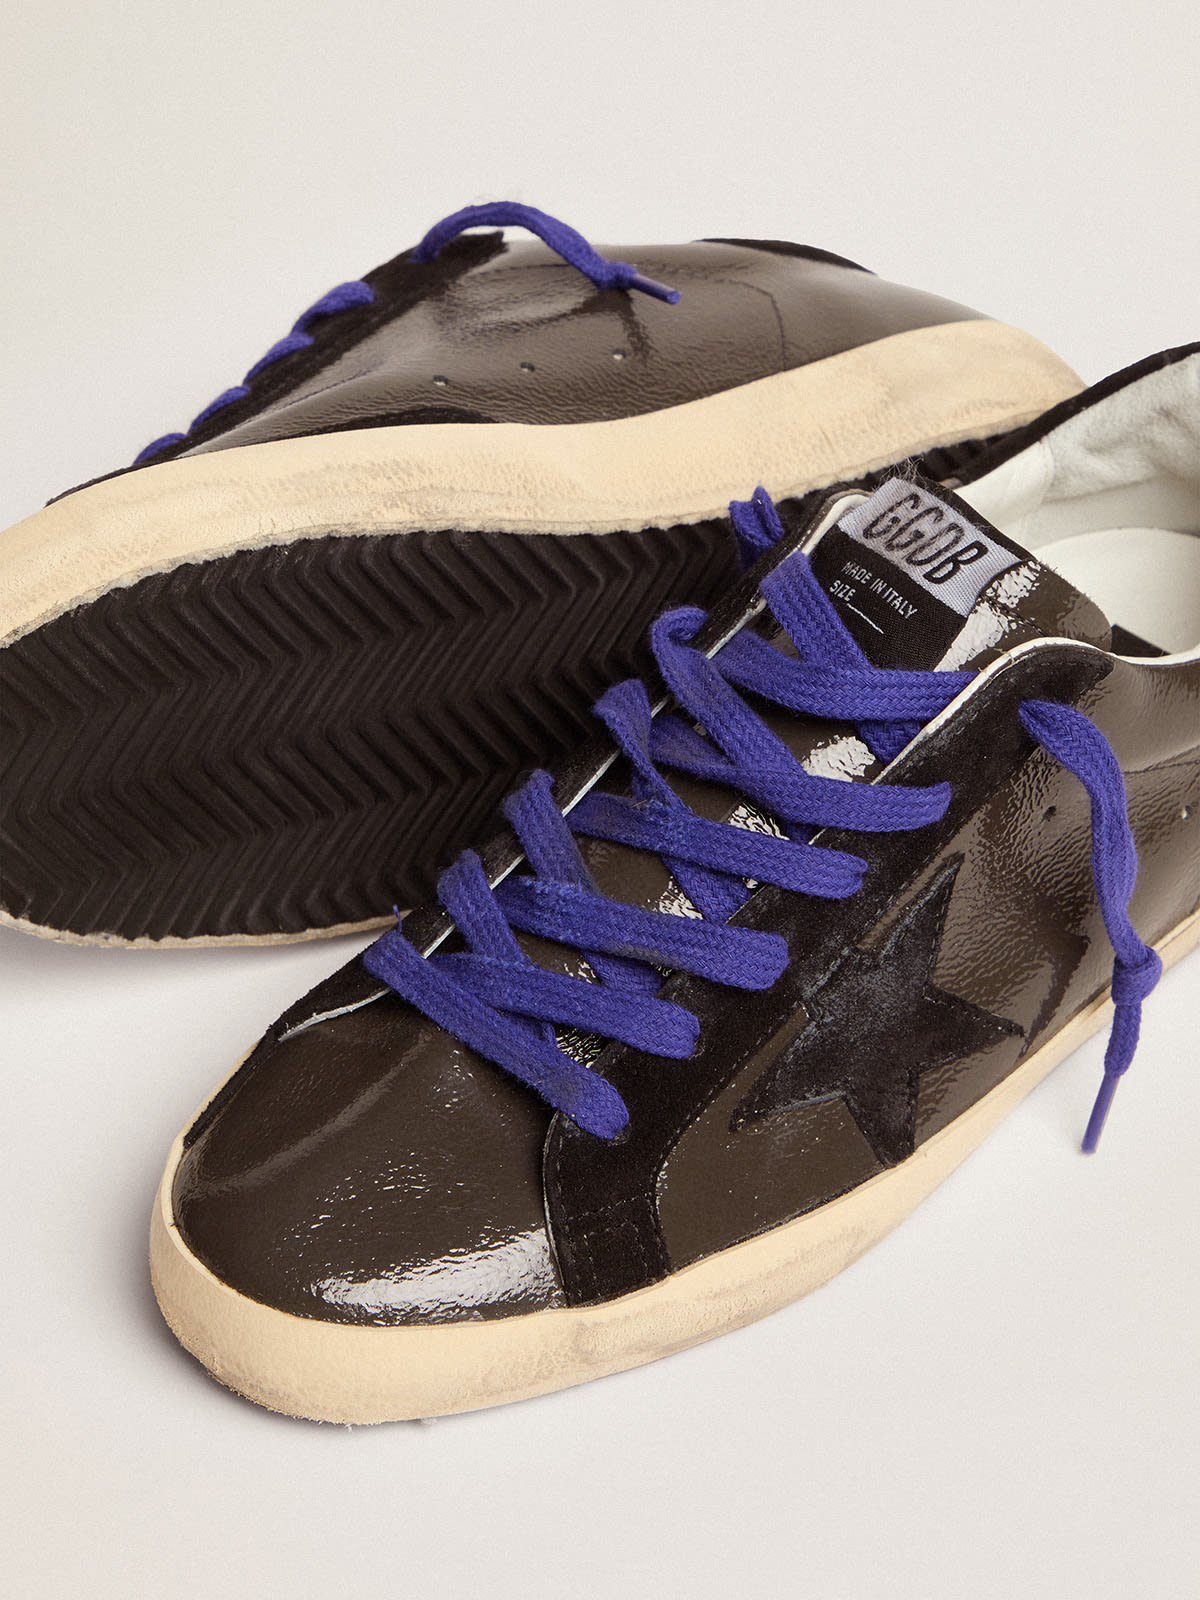 Golden Goose - Super-Star sneakers in gray patent leather with black suede inserts in 